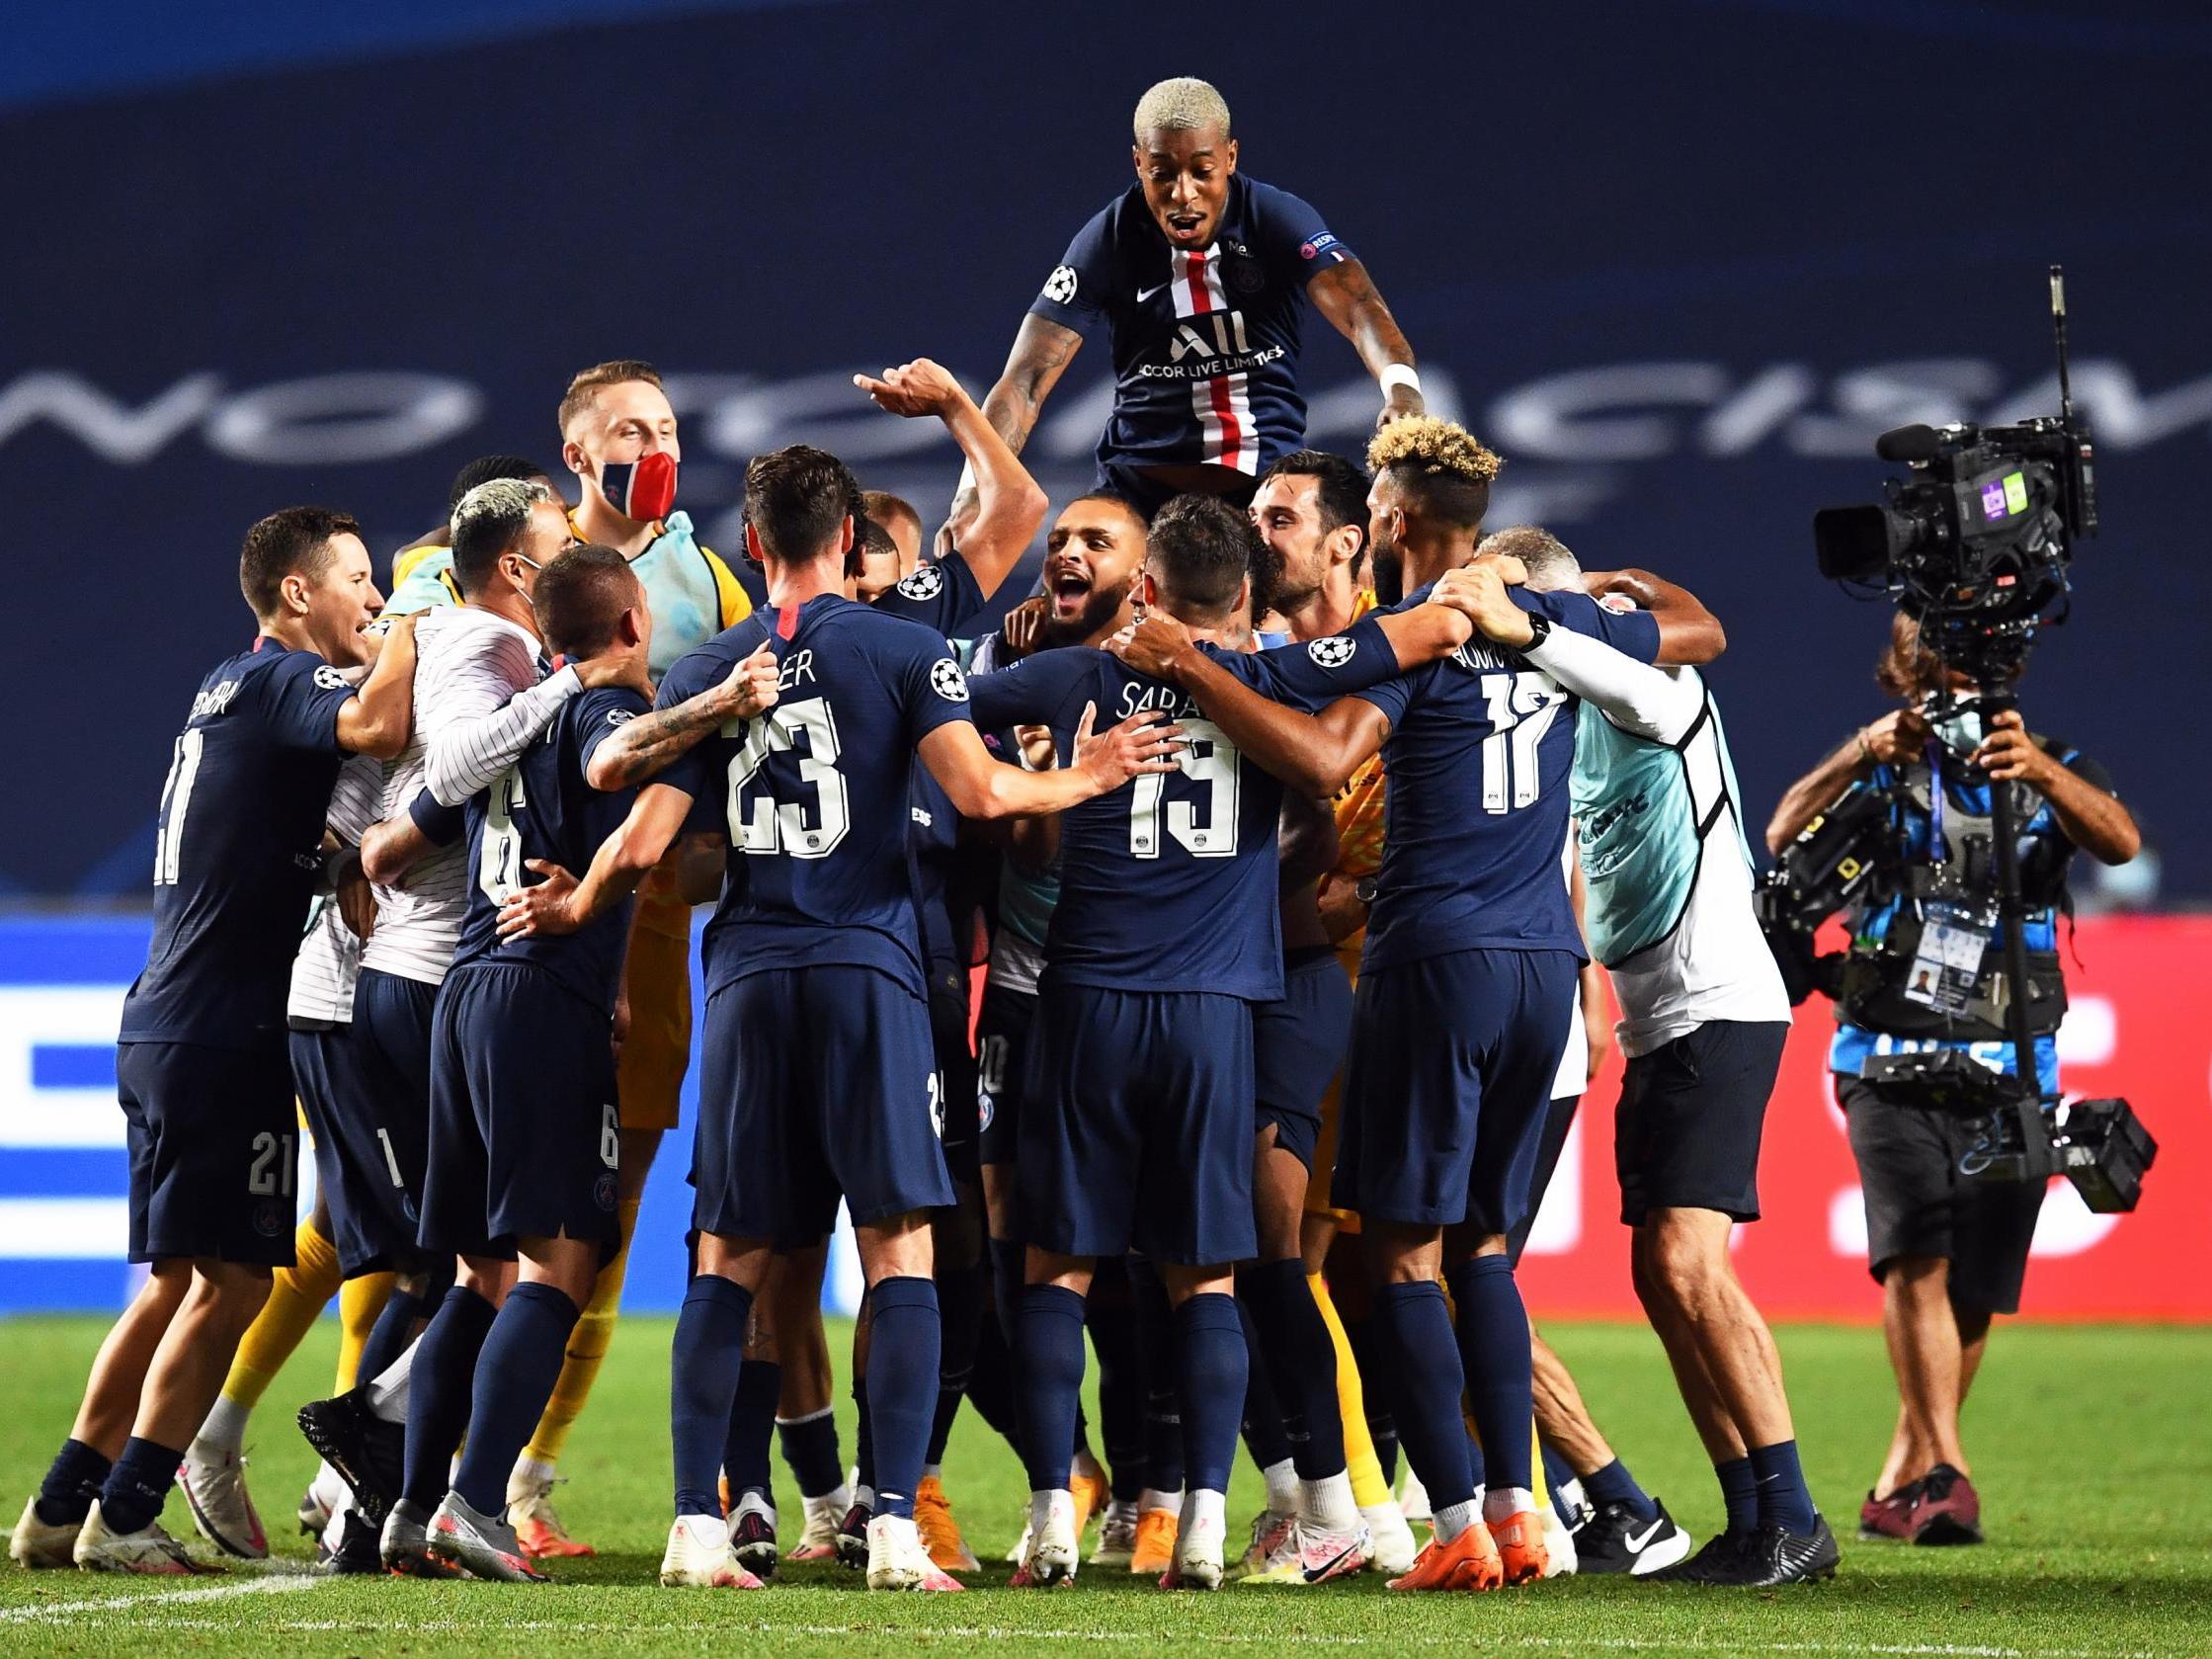 Players of PSG celebrate